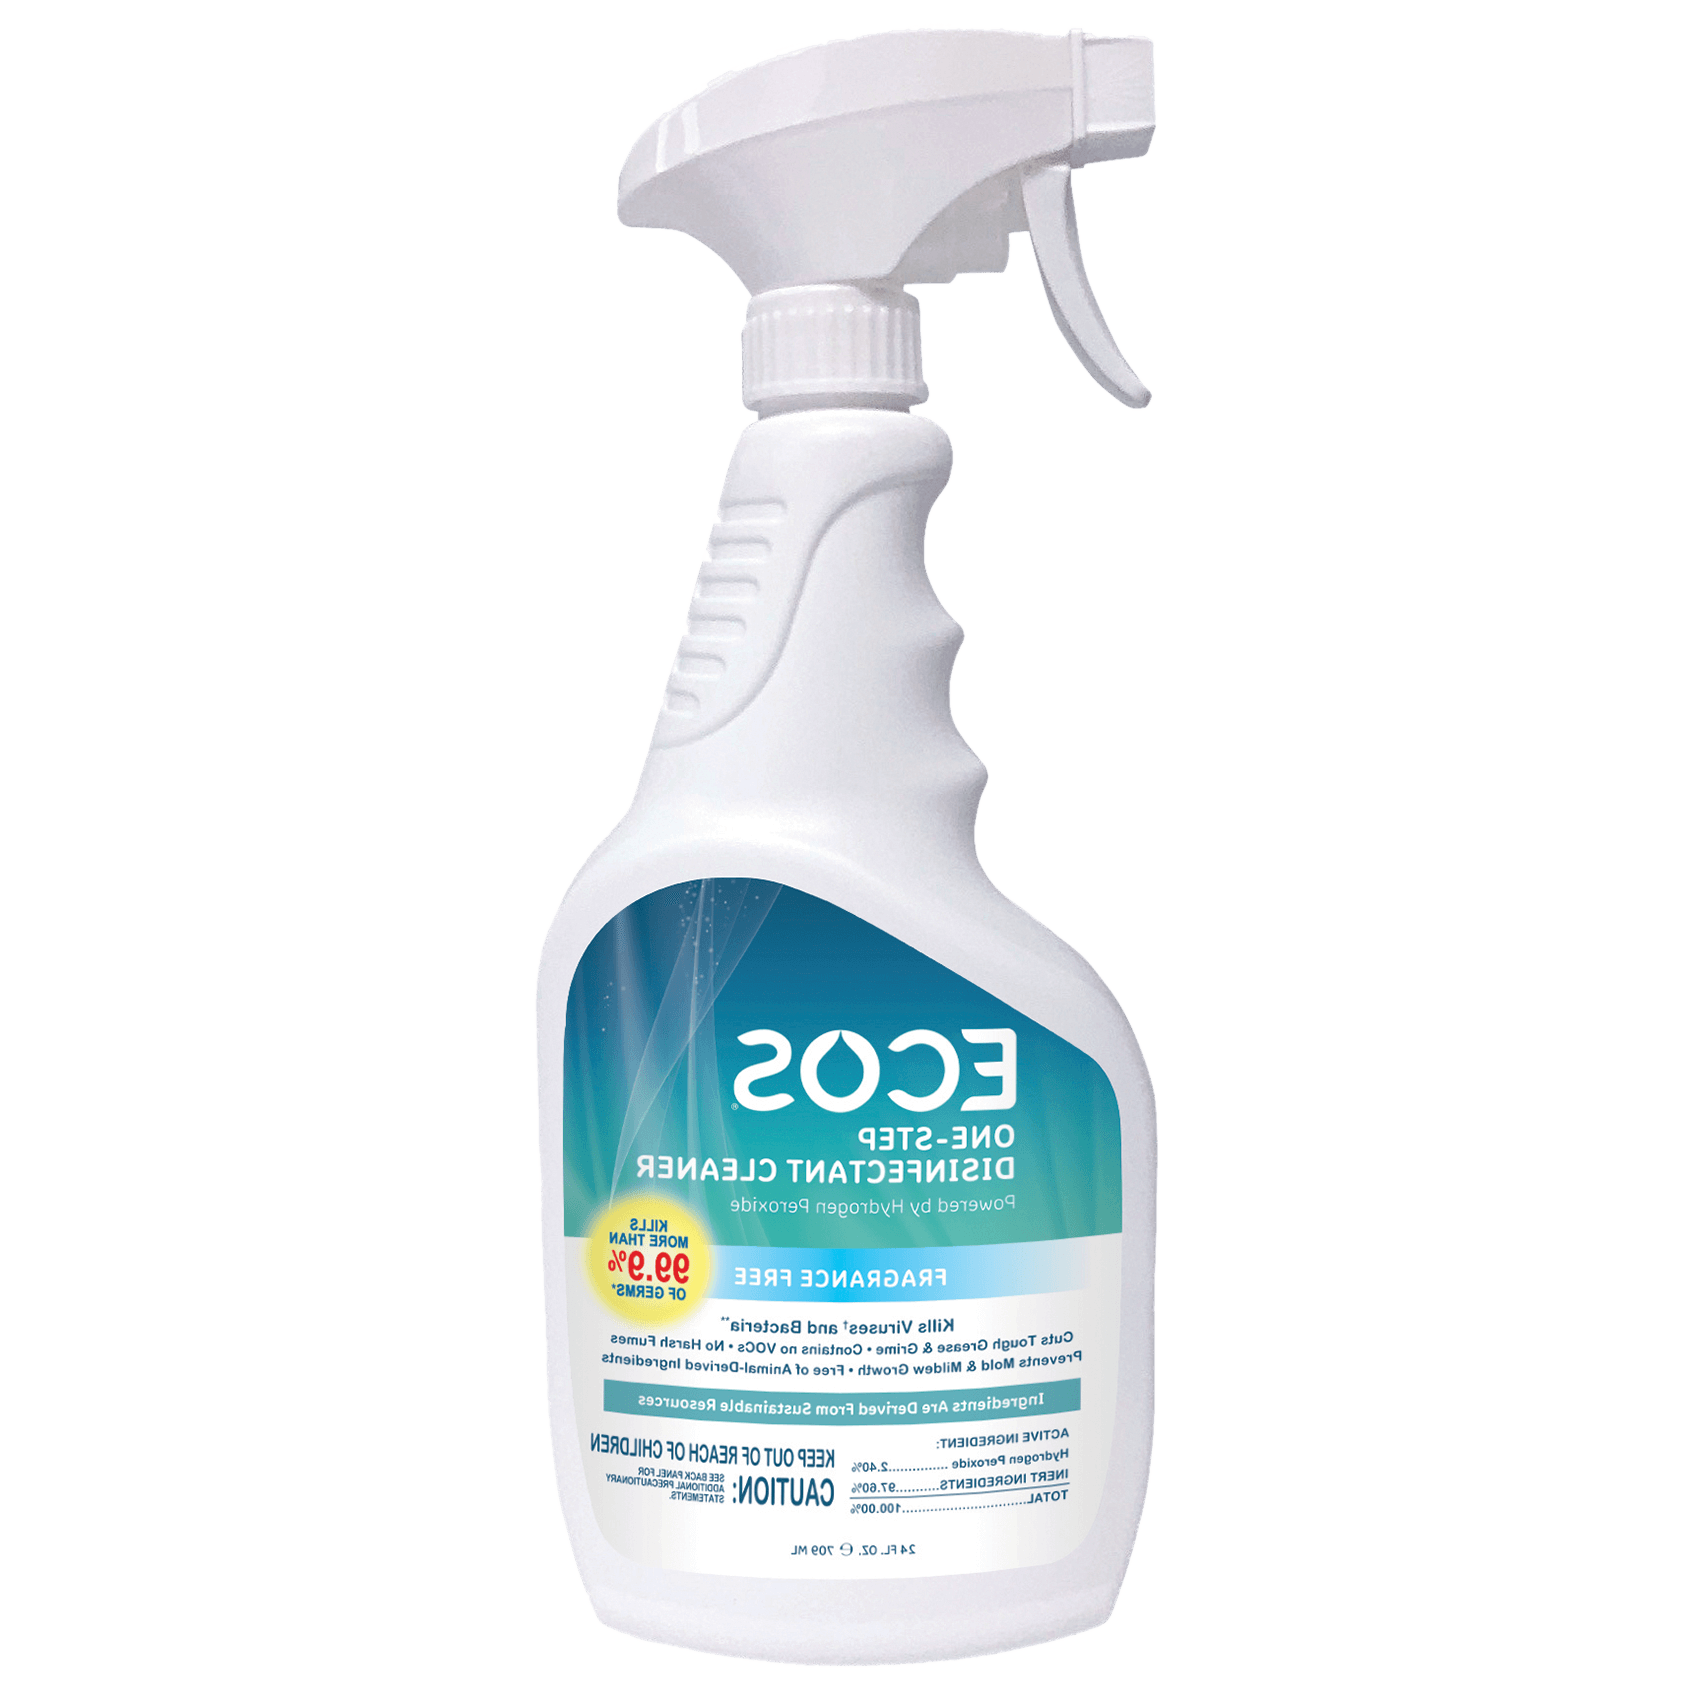 ECOS Disinfectant Front